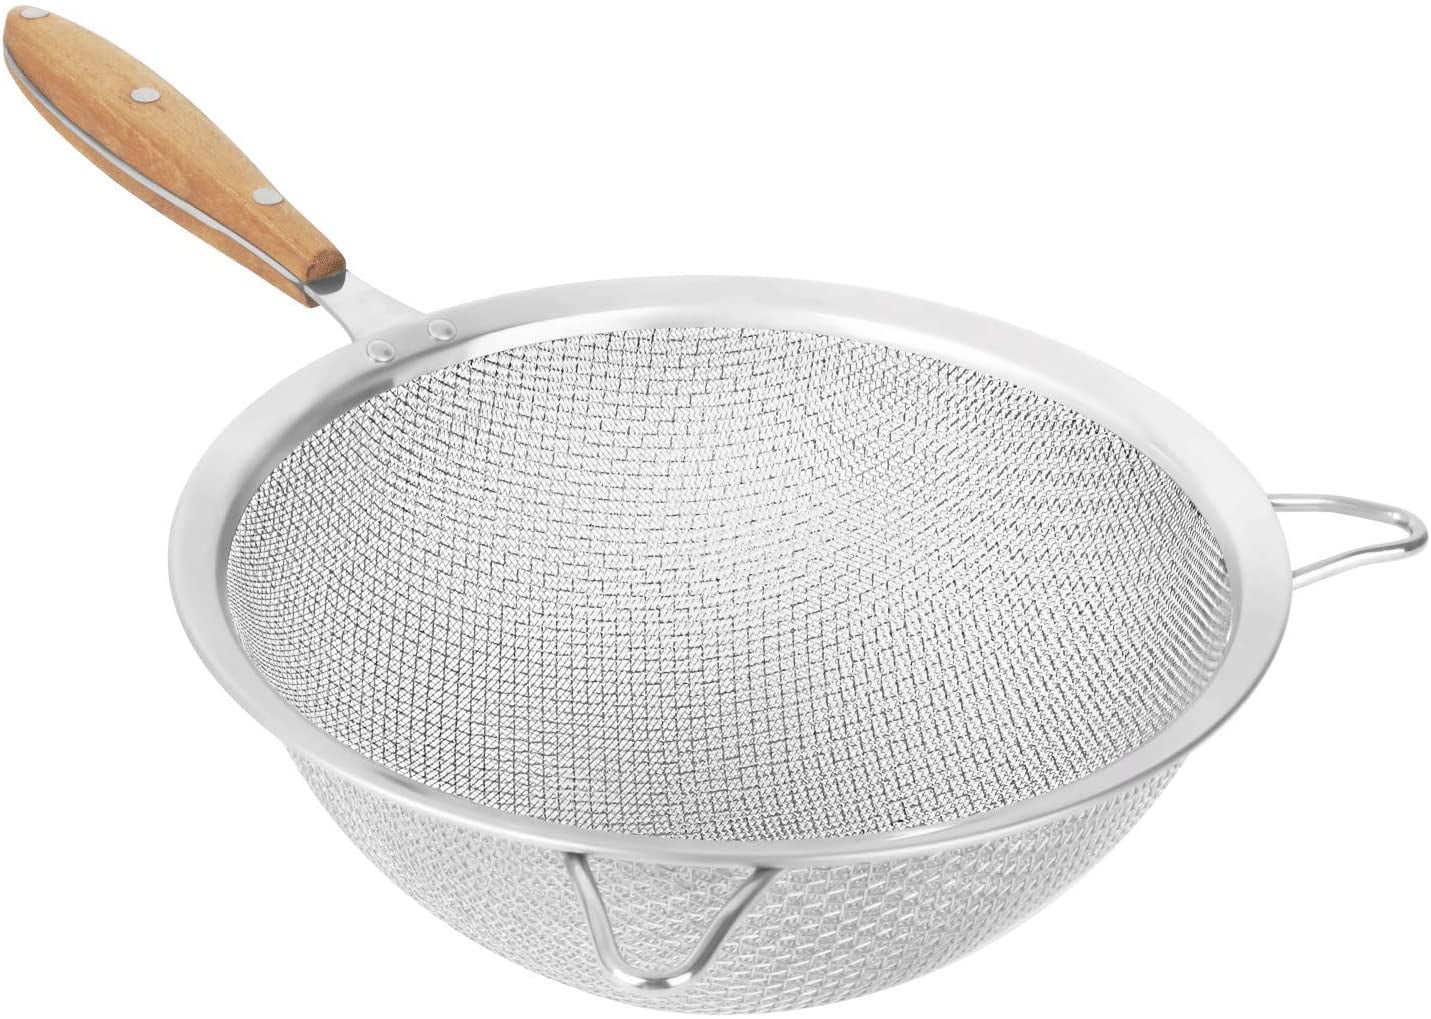 LiveFresh Large Stainless Steel Fine Mesh Strainer with Reinforced Frame and Sturdy Rubber Handle Grip Designed for Chefs and Commercial Kitchens & Perfect for Your Home 23 cm Diameter 9 Inch 